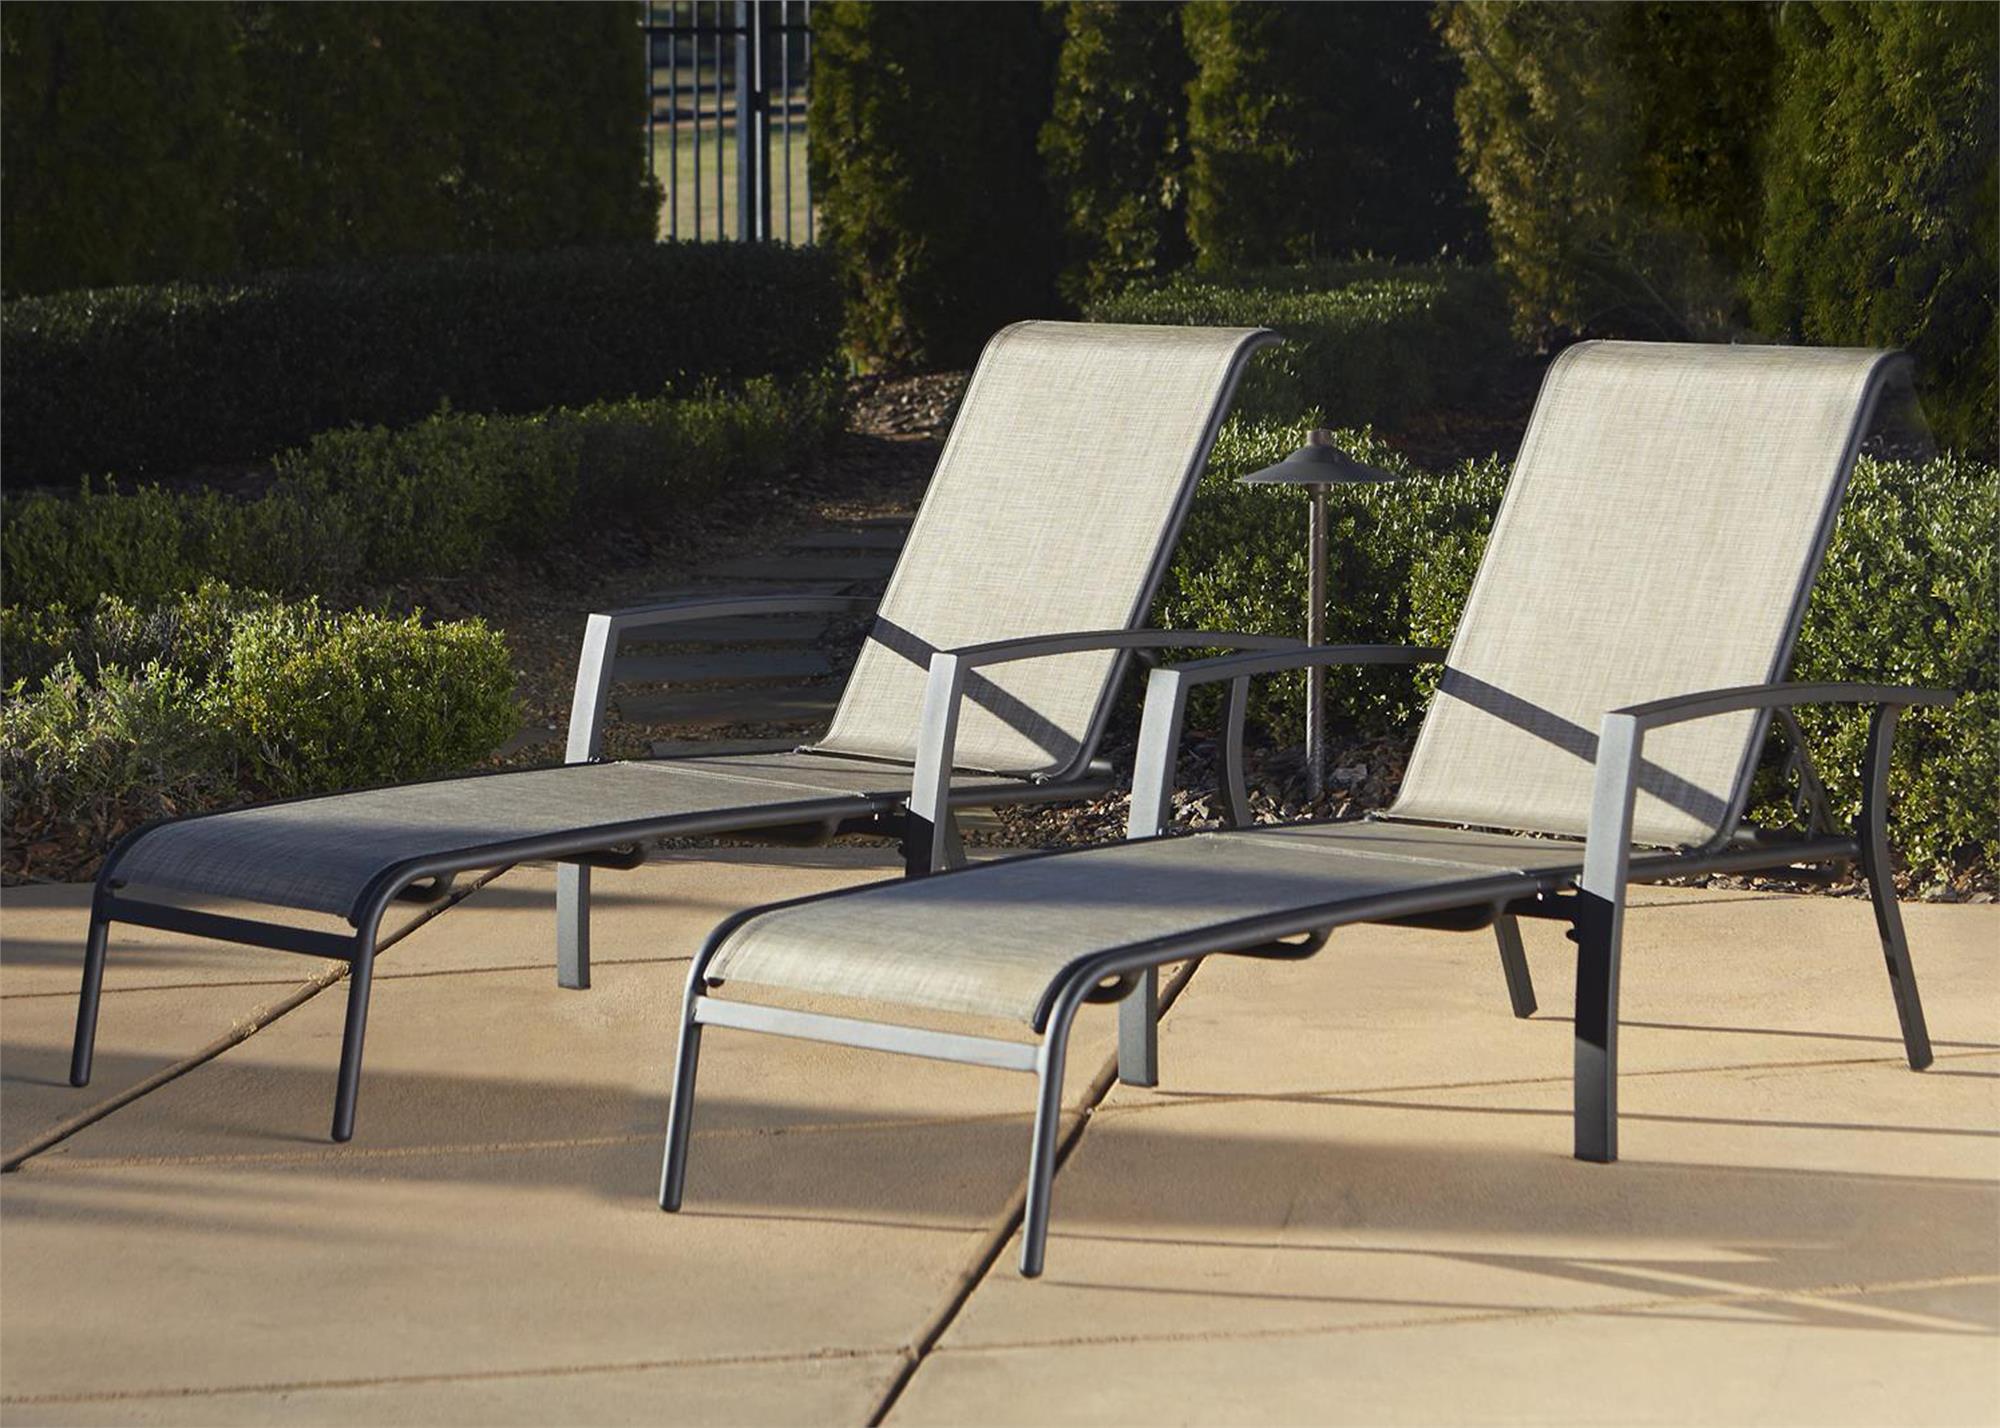 Adjustable Aluminum Chaise Lounge Chair - Brown - N/A